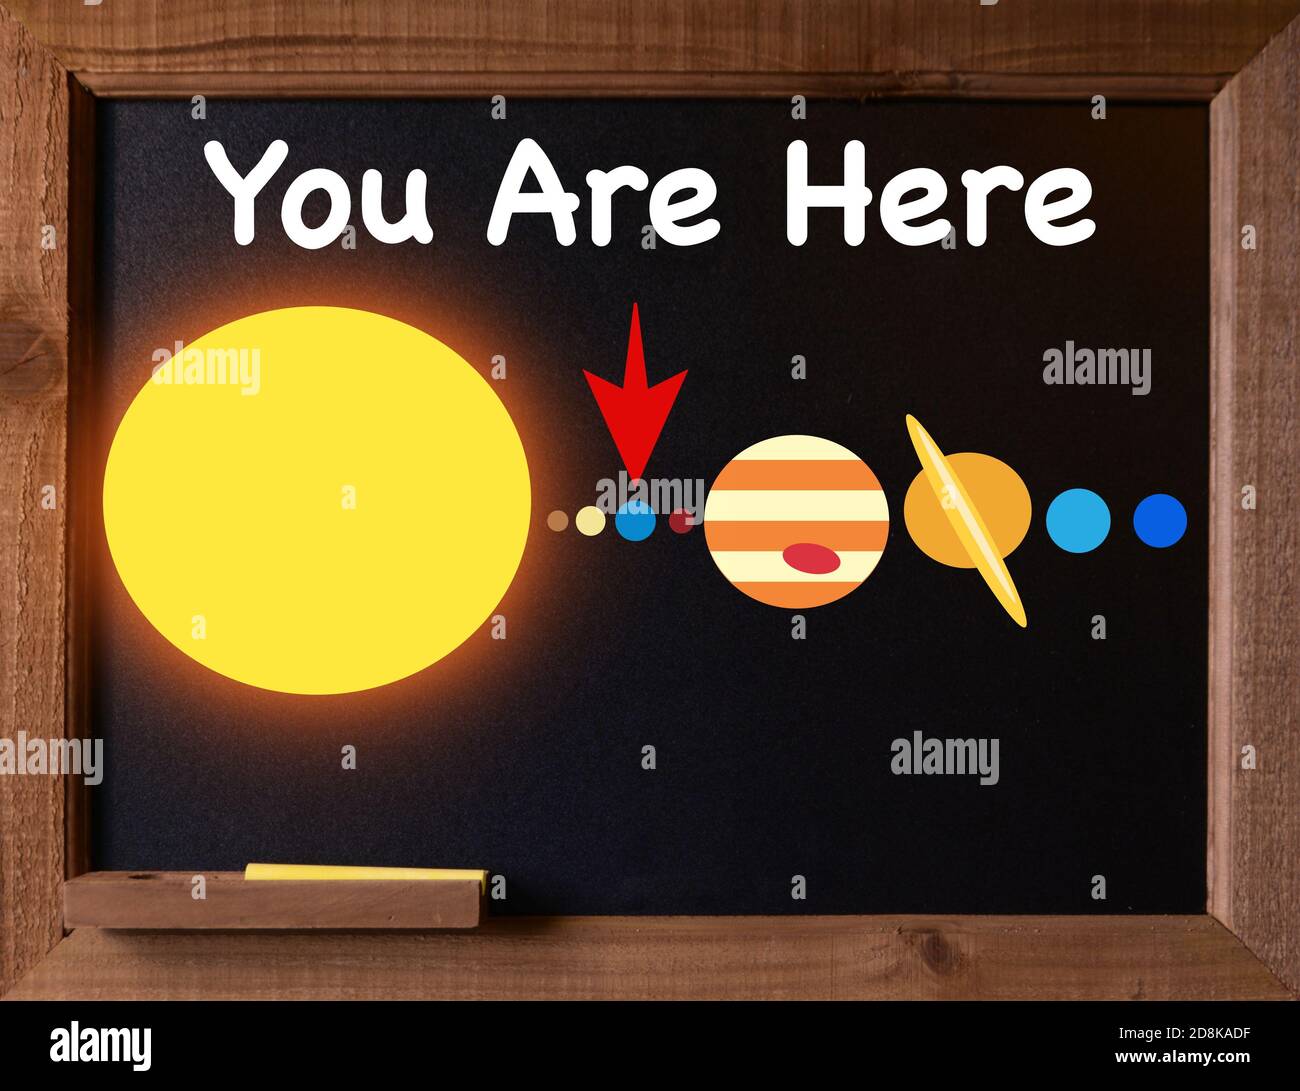 The solar system depicted on a black chalkboard with red arrow and you are here sign Stock Photo